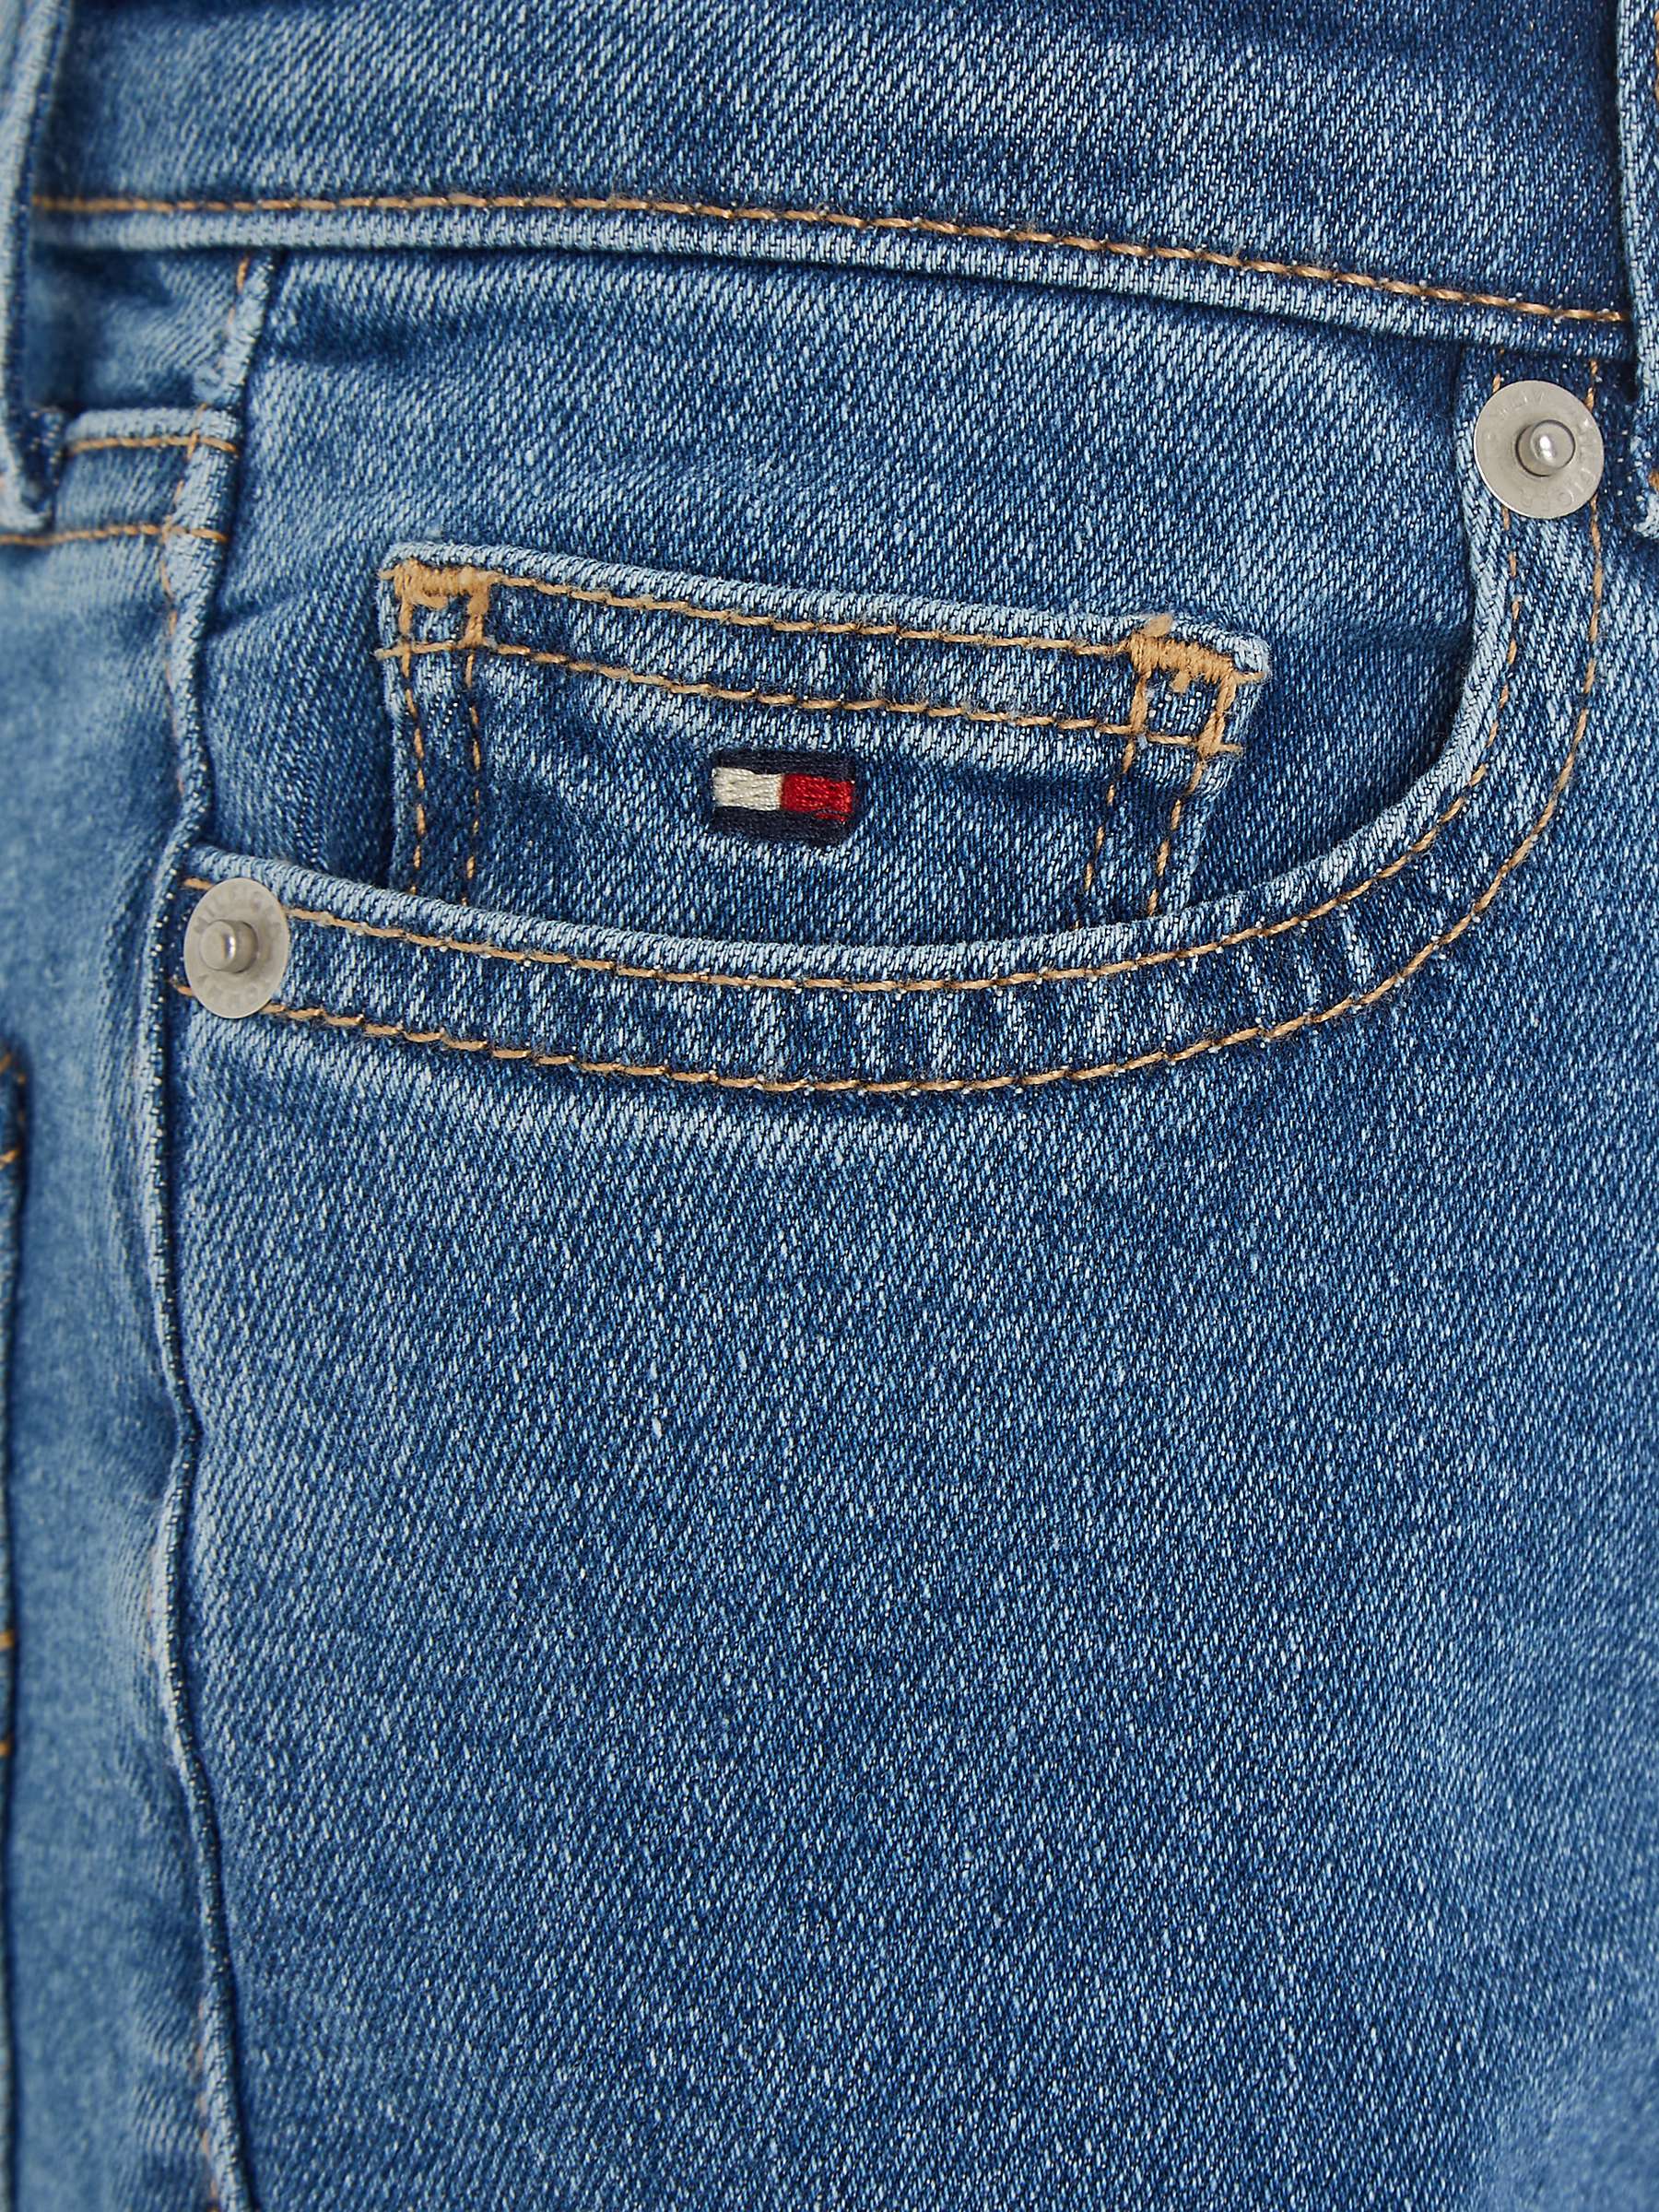 Buy Tommy Hilfiger Kids' High Rise Tapered Jeans, Midused Online at johnlewis.com